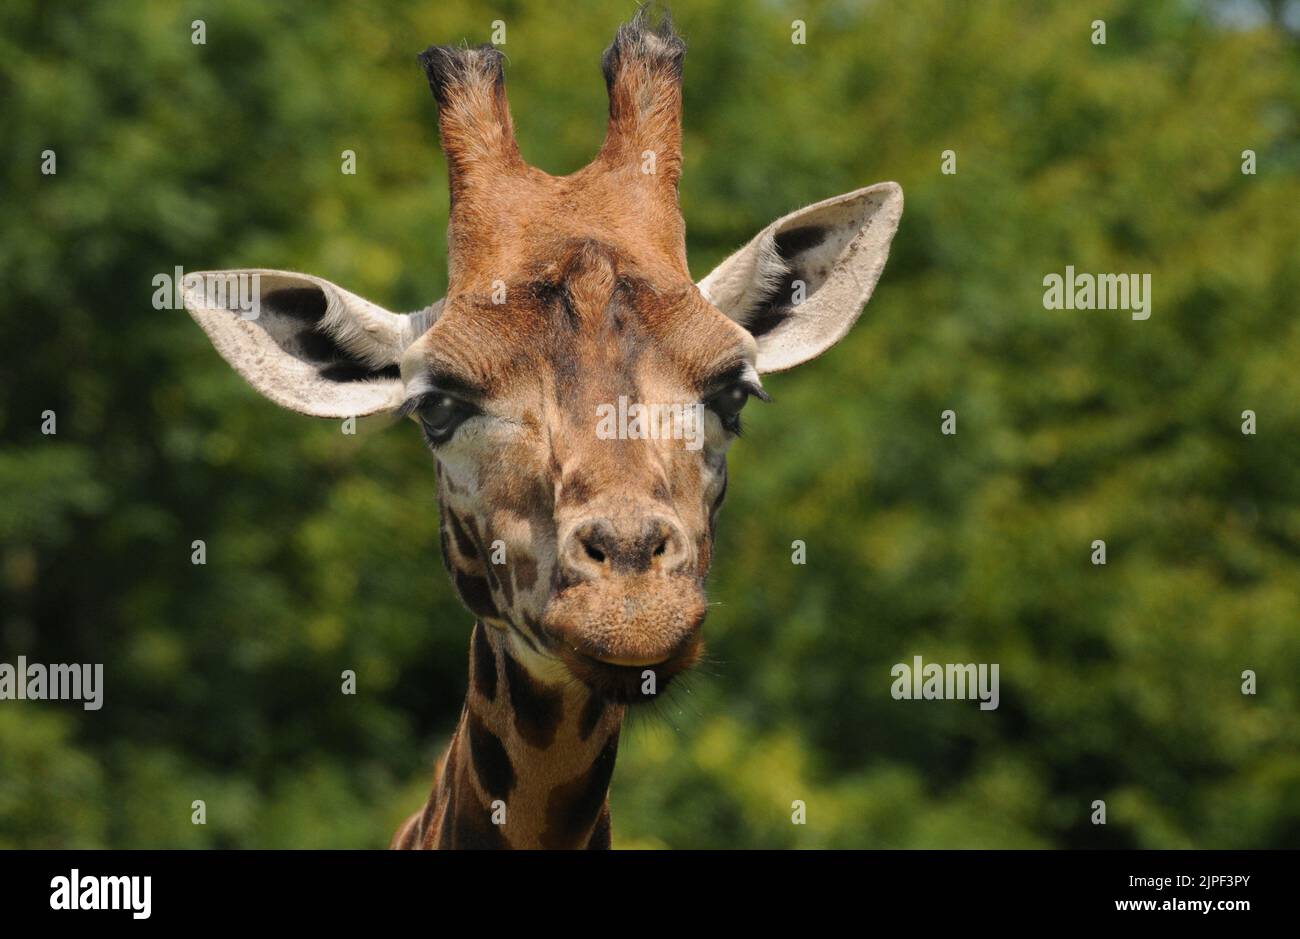 YOUNG GIRAFFE MARWELL, HAMPSHIRE MIKE WALKER 2011 MIKE WALKER PICTURES, Stock Photo